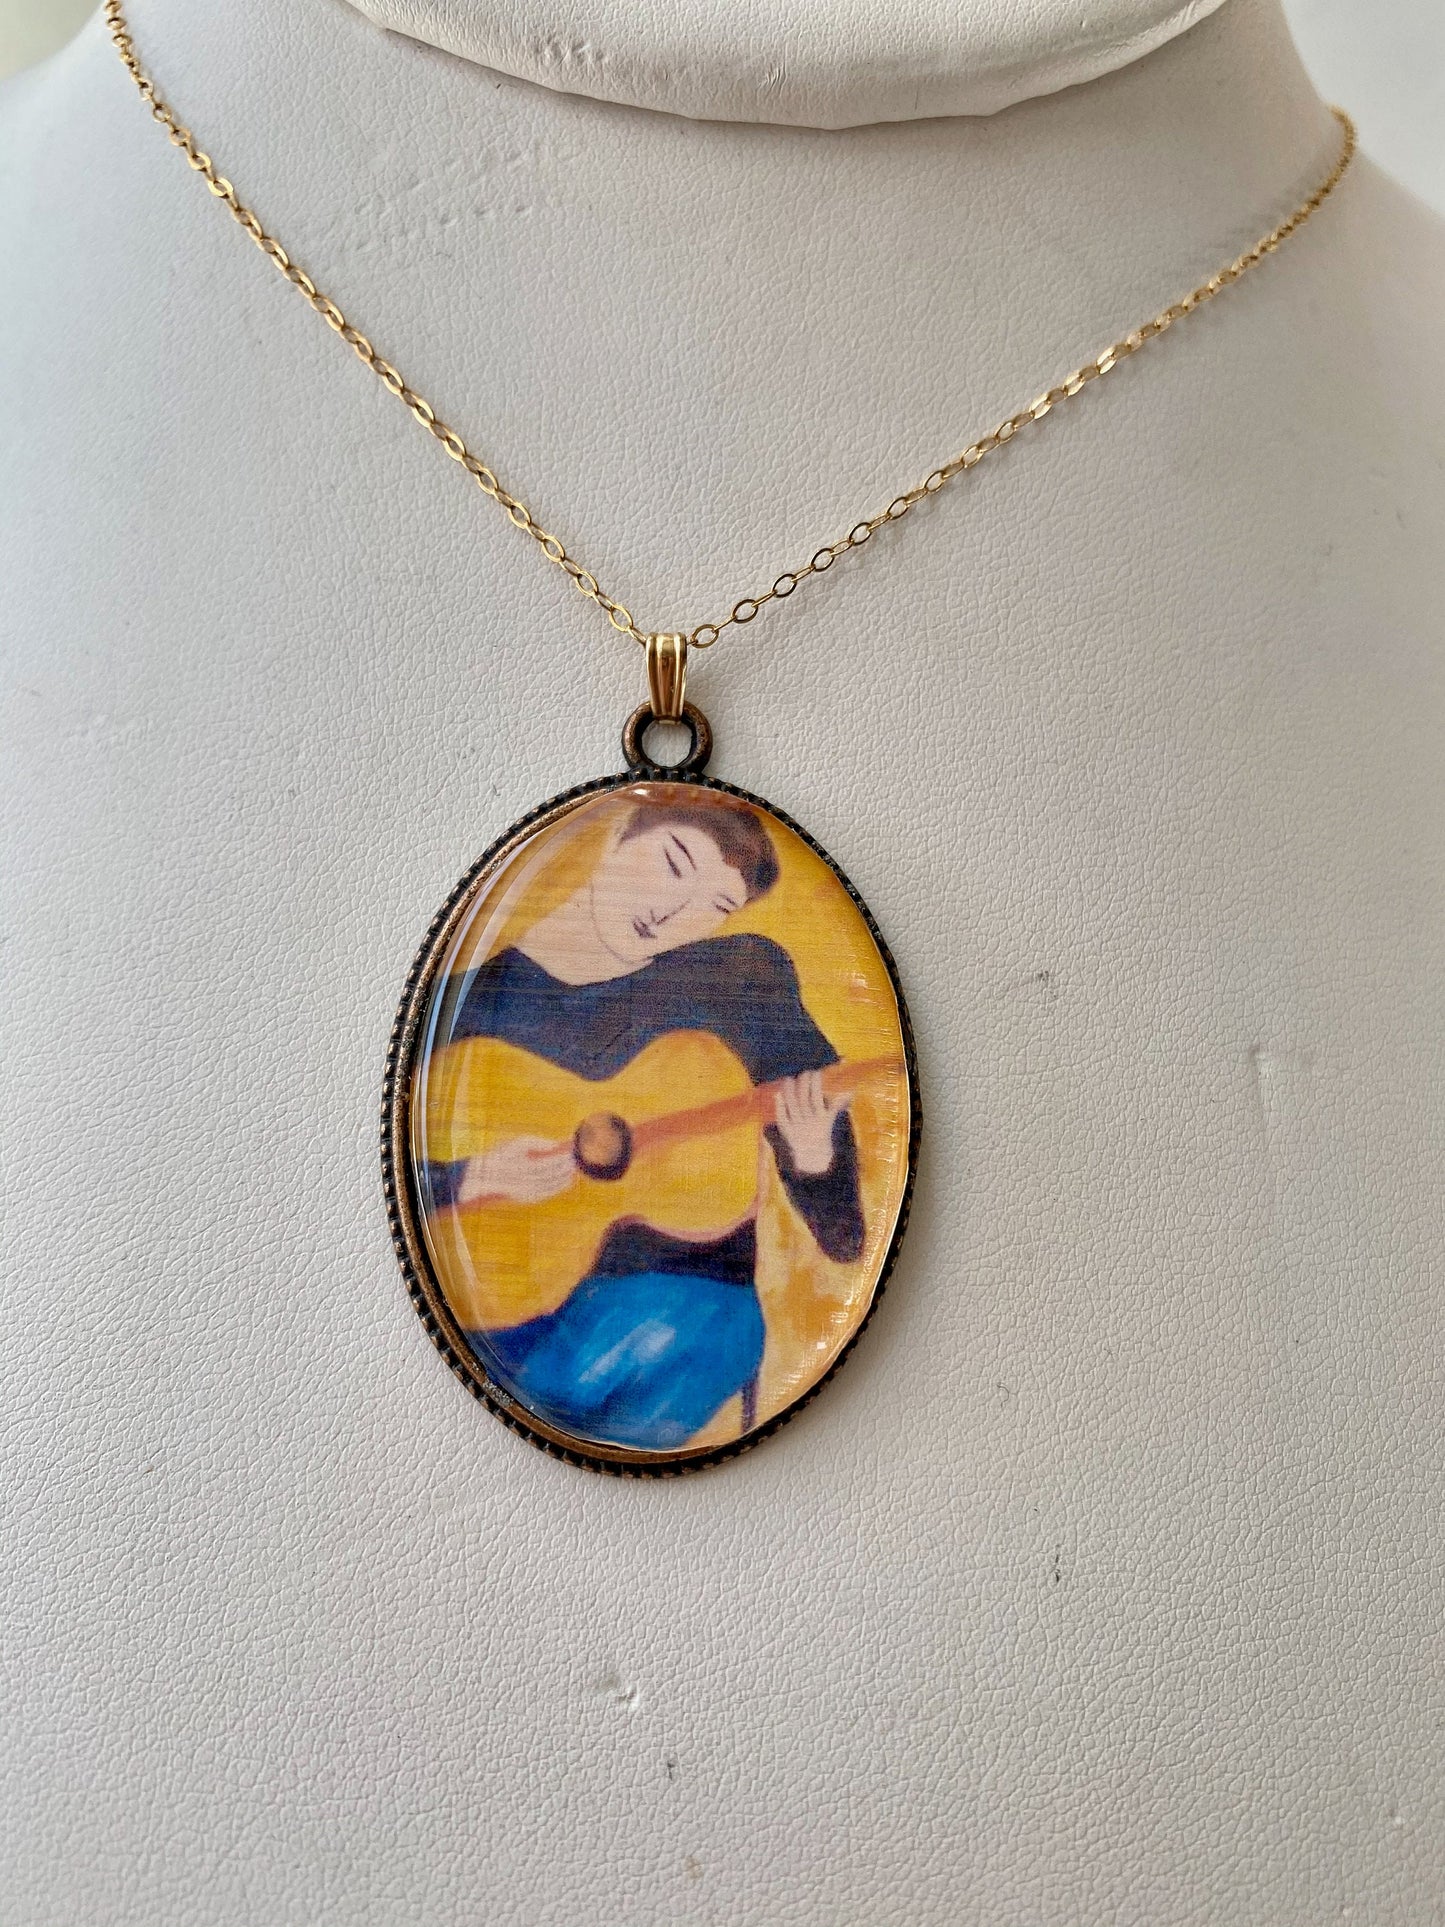 Original and beautiful hand painted guitar boy pendant. Brass frame and 14 karat gold filled chain.